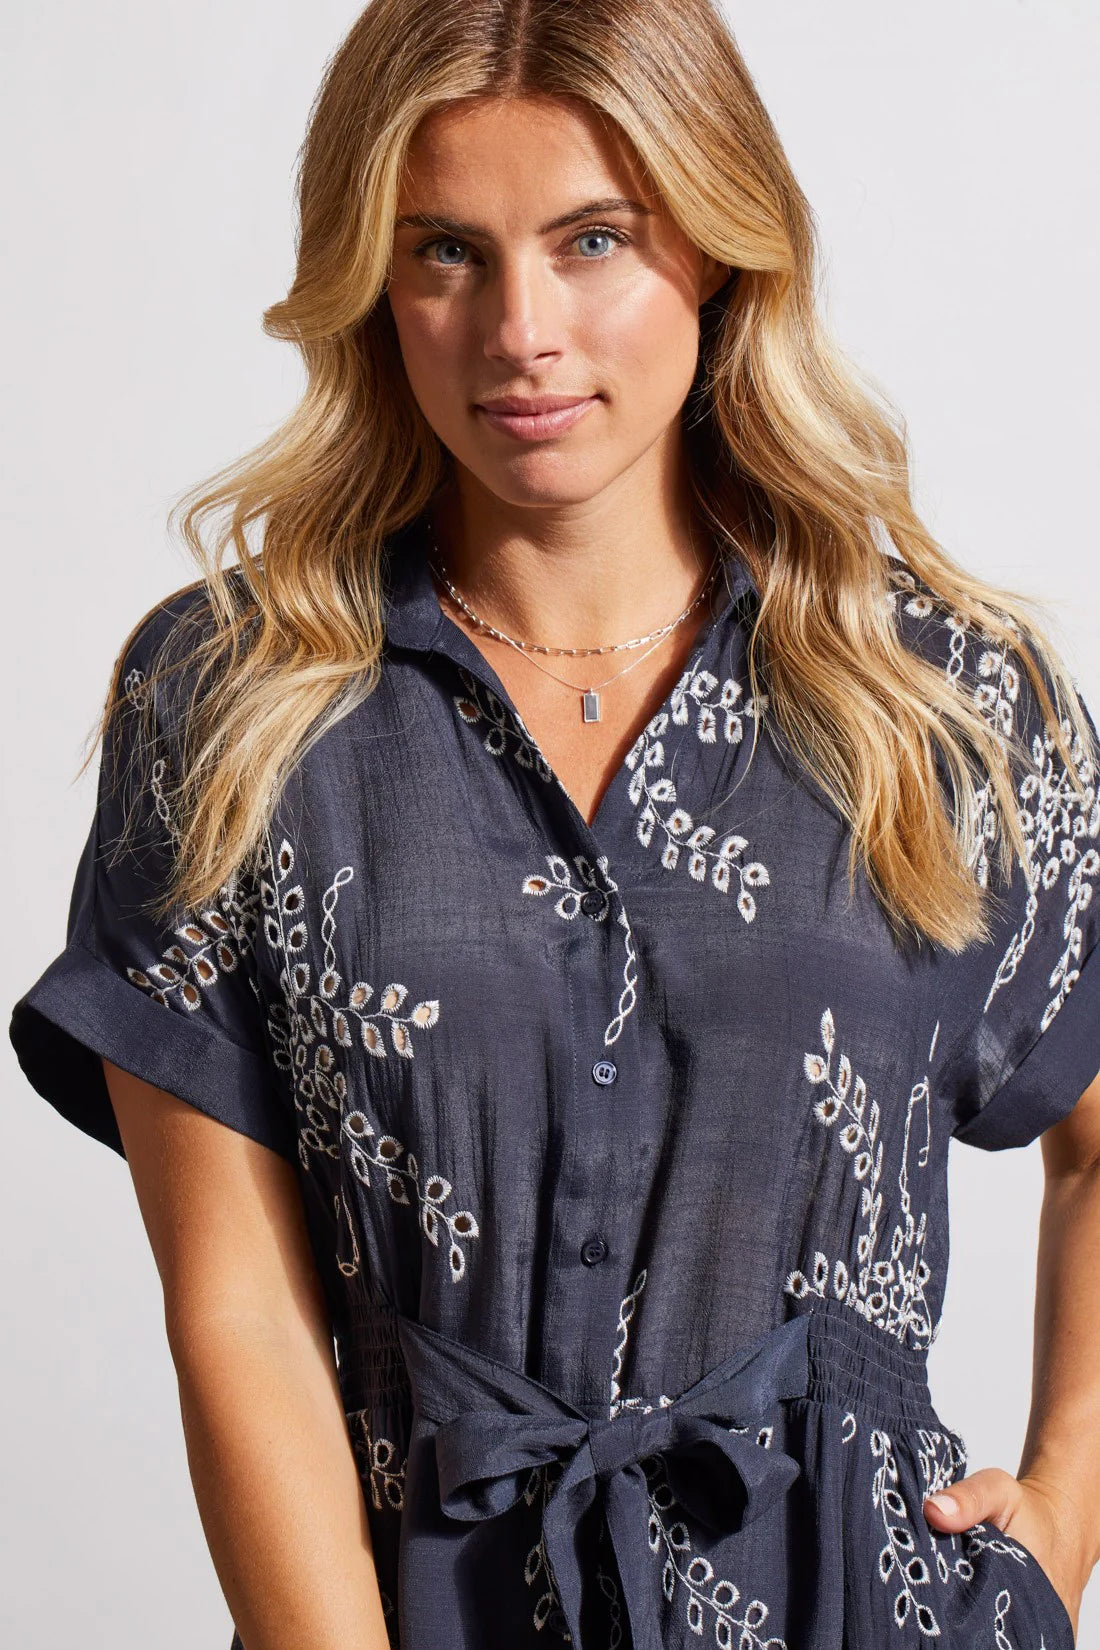 Intricated English embroidery adds a chic touch to this button-up shirt dress. A matching belt lets you adjust the fit, short kimono sleeves complete the look, and side seam pockets add a functional detail.